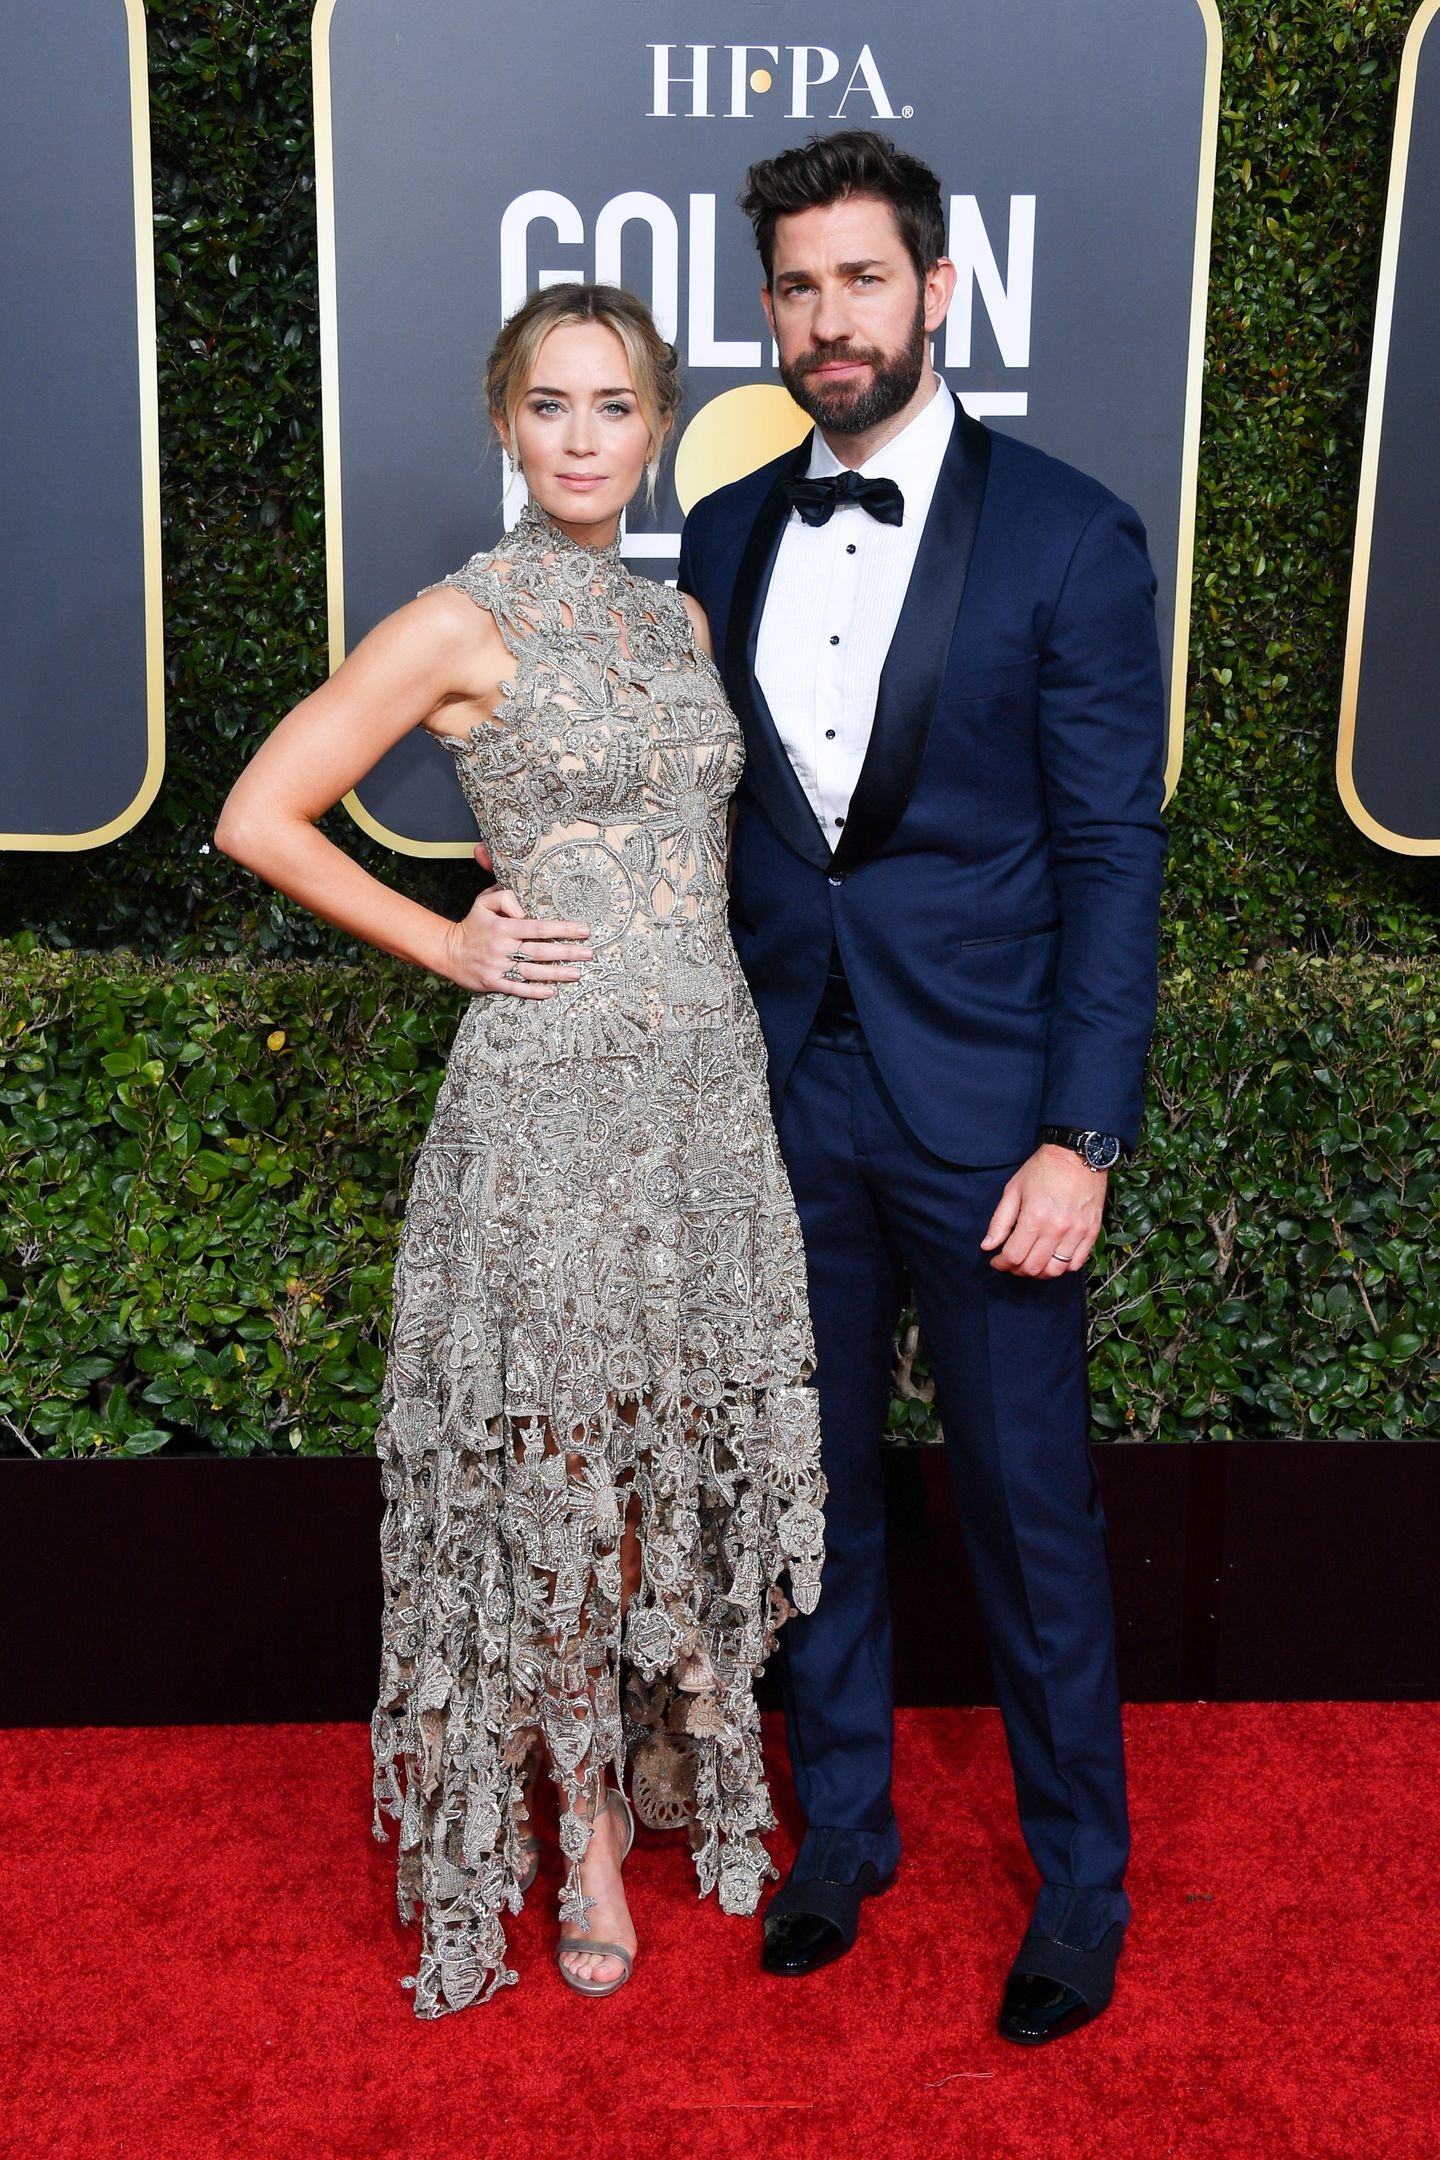 Emily Blunt and John Krasinski: The couple's first daughter was born on February 16, 2014. 1440x2160 HD Wallpaper.